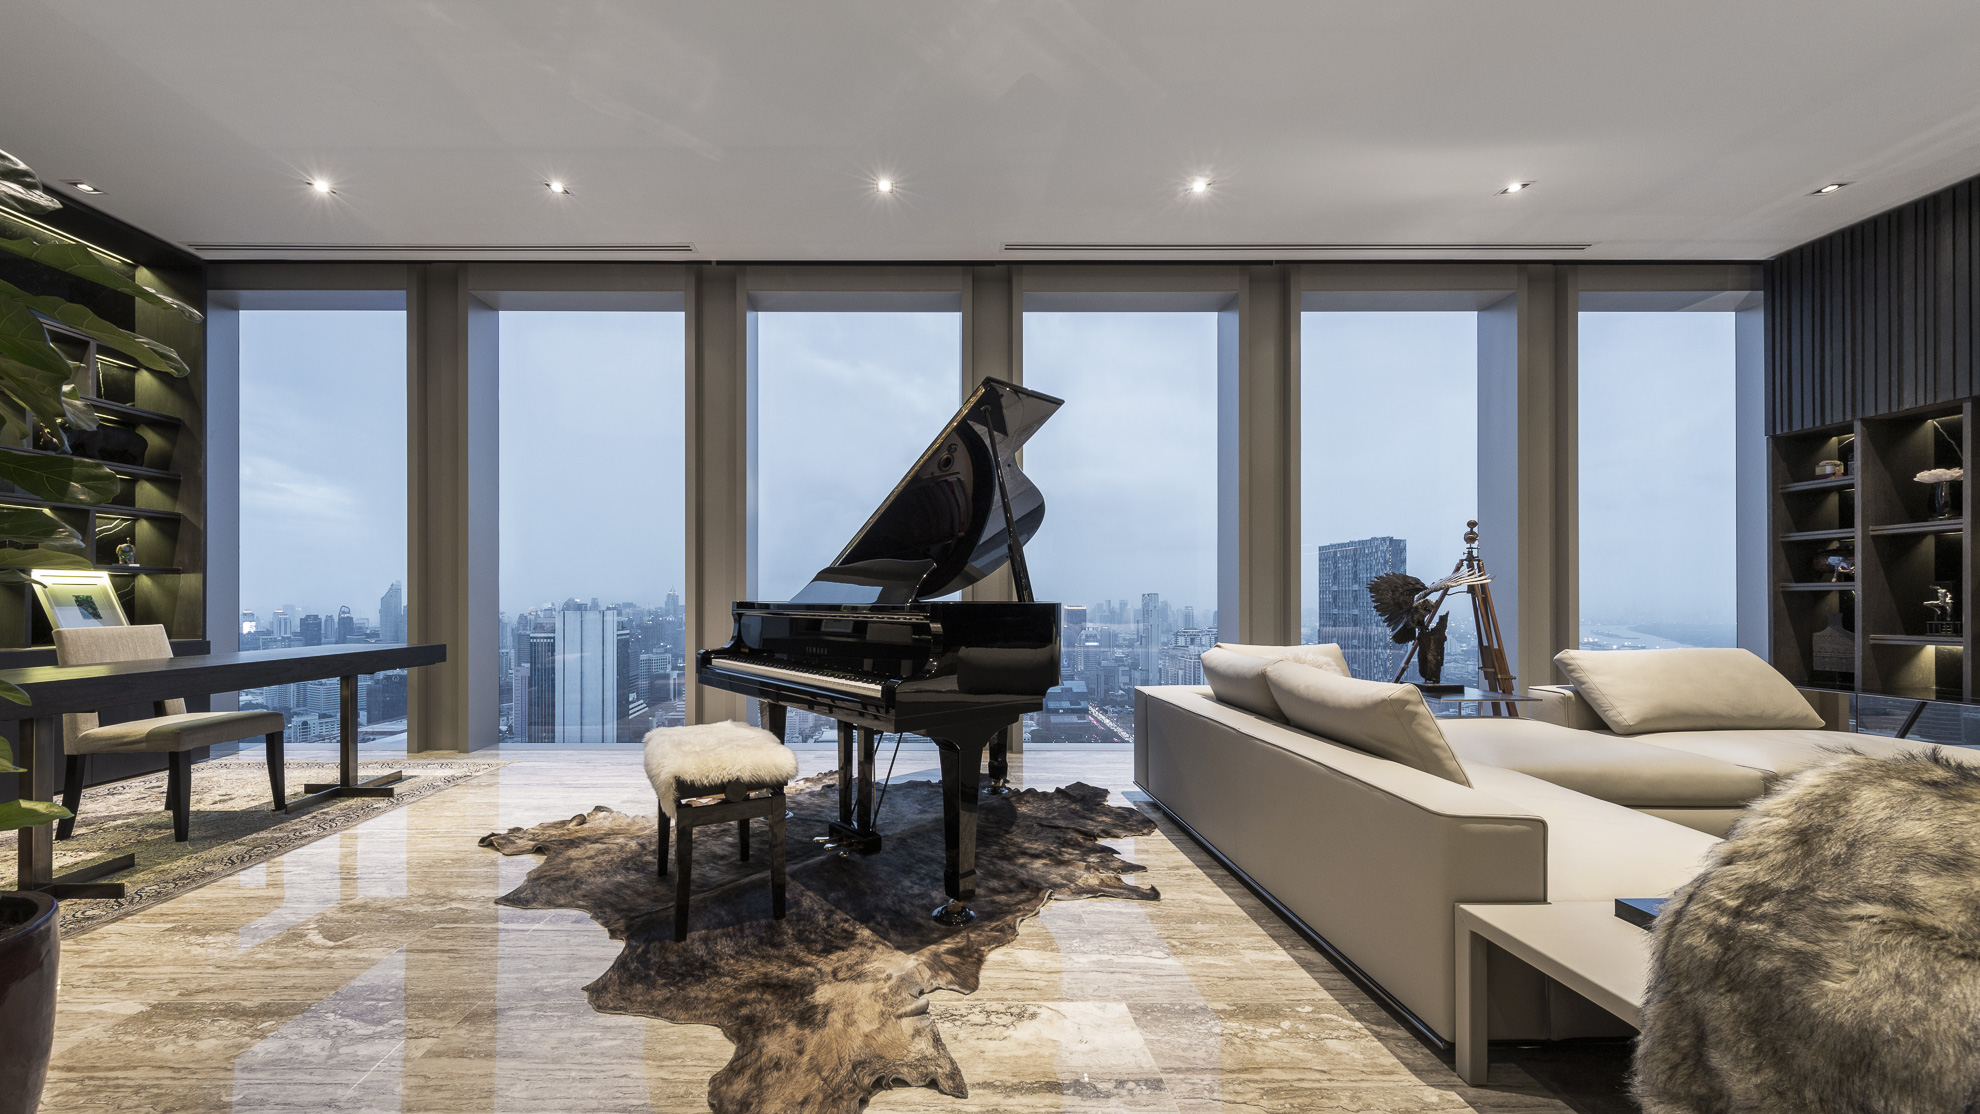 The Ritz-Carlton Residence at Mahanakhon Interior Design by GLA.Design - Sofography | Architectural Photography Studio by Chalermwat Wongchompoo